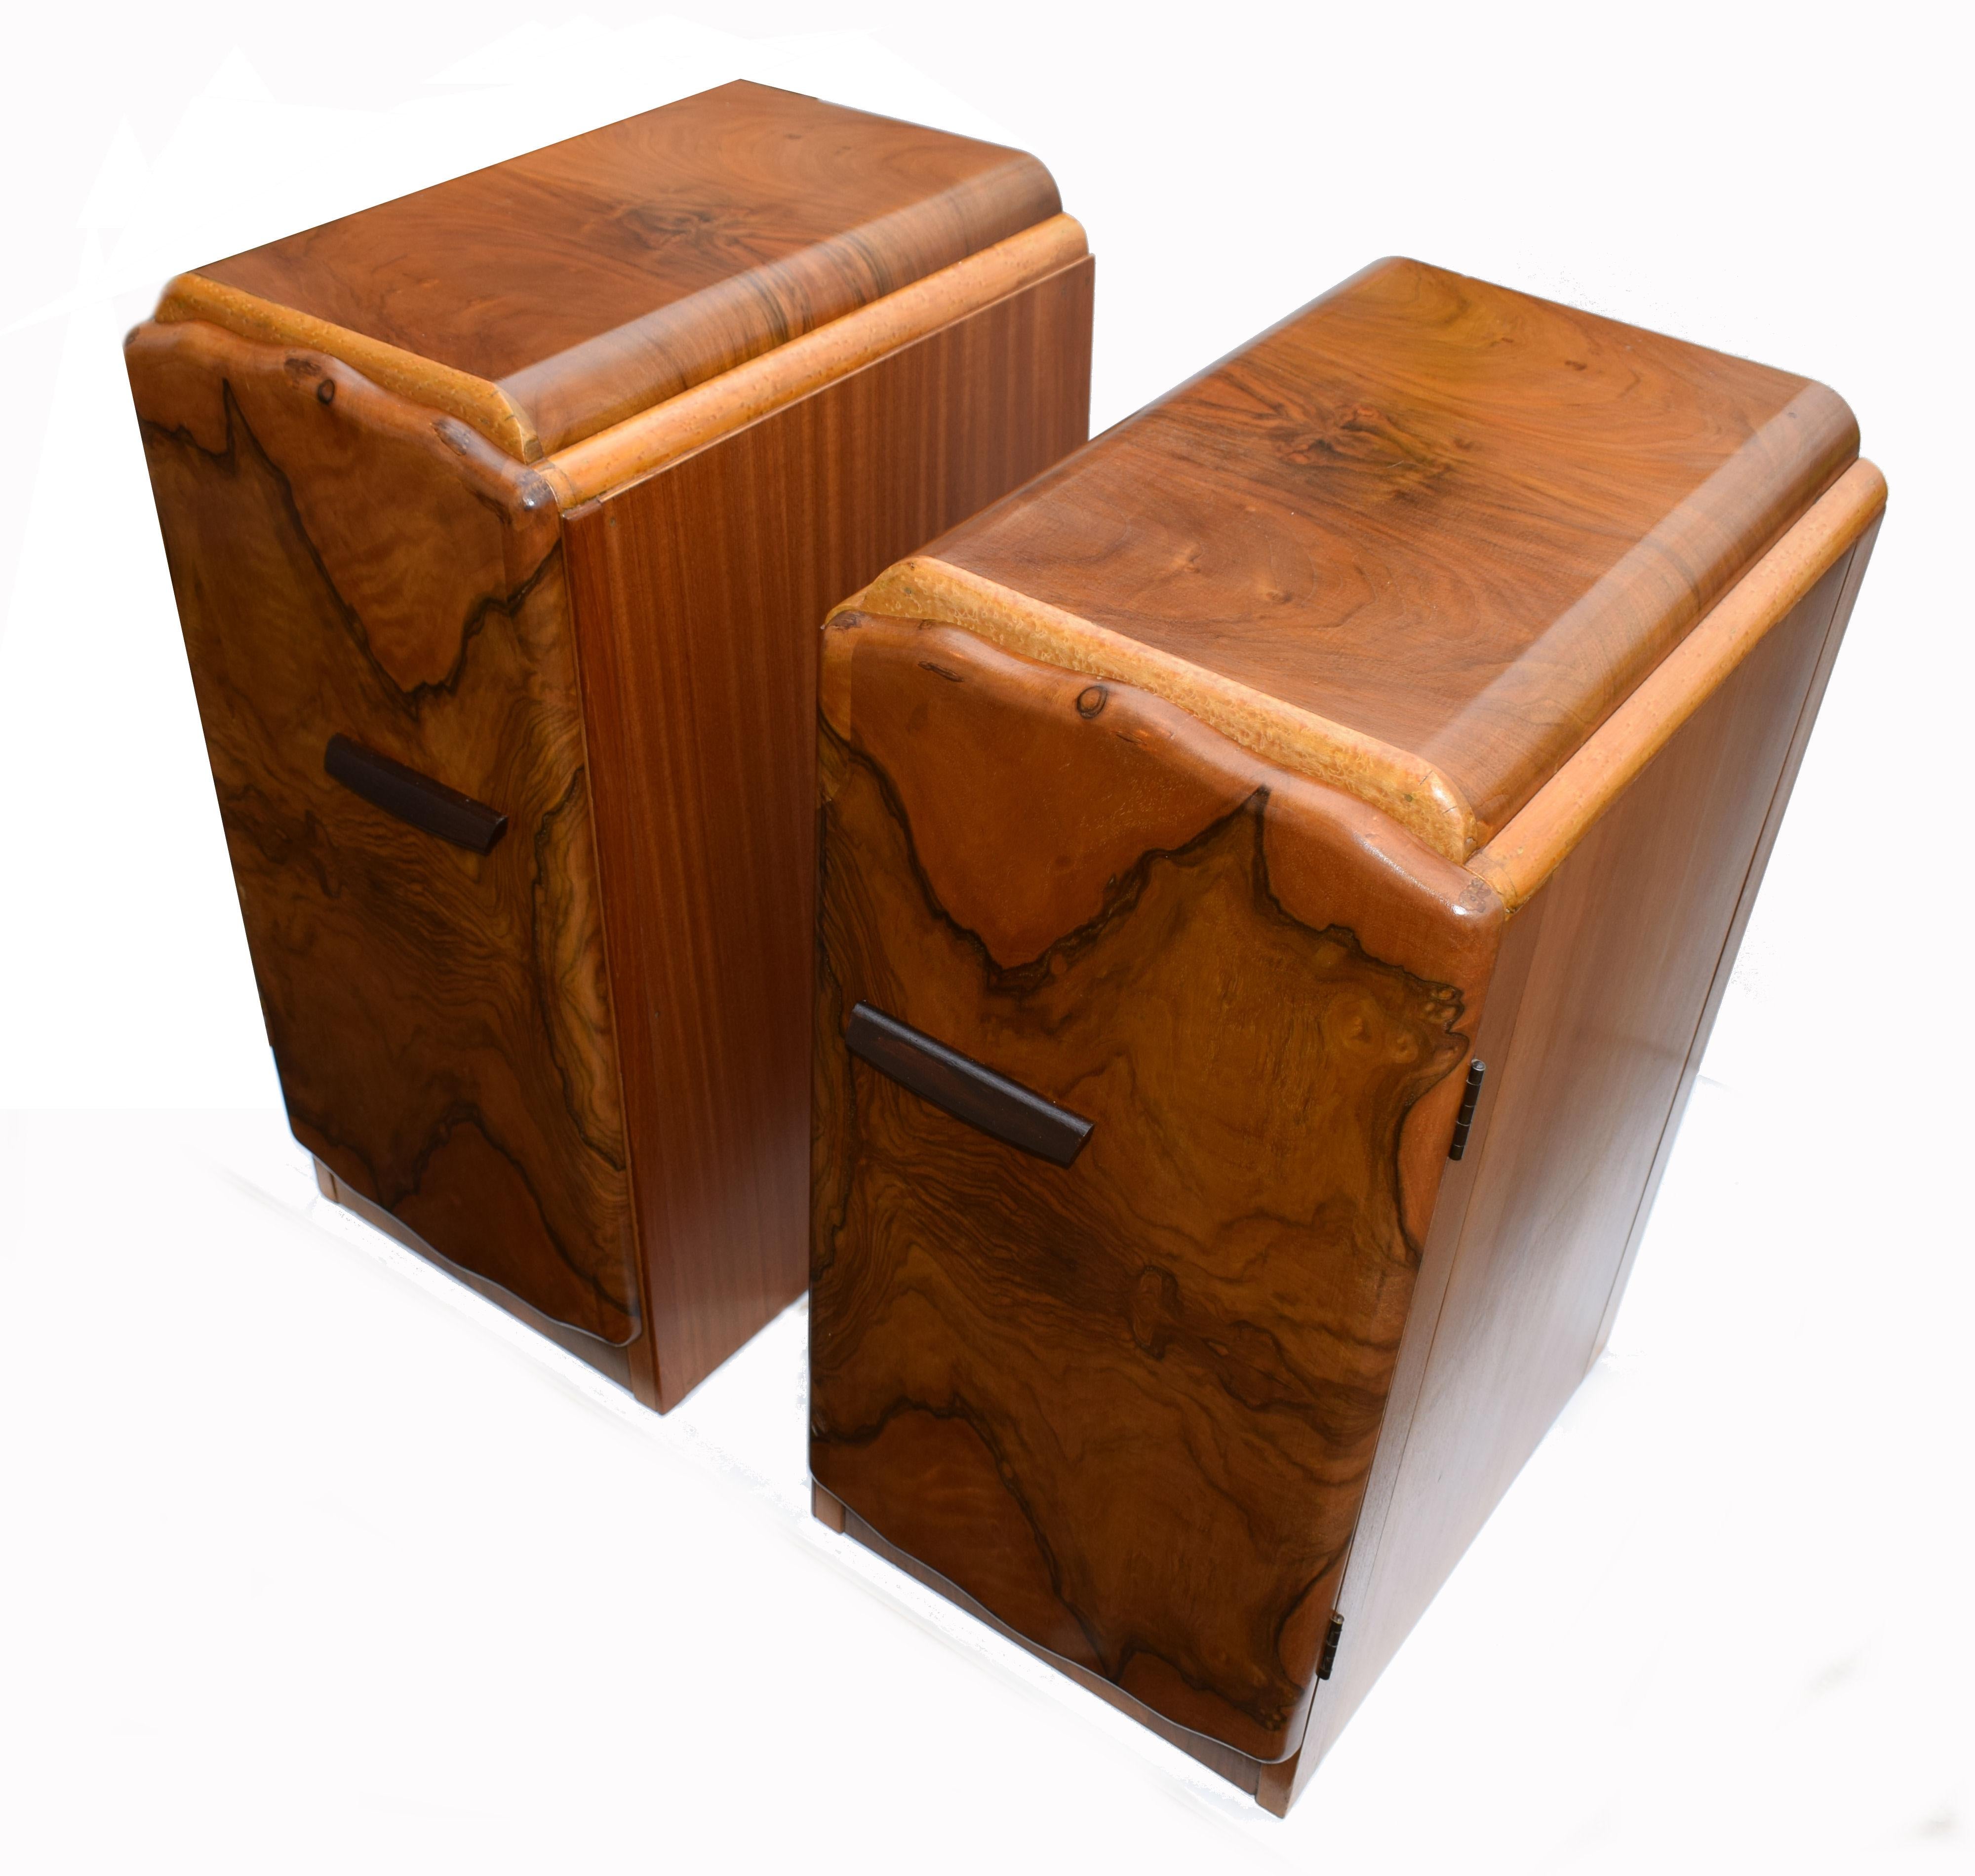 Matching Pair of 1930s Art Deco Walnut And Maple Bedside Tables im Zustand „Gut“ in Devon, England